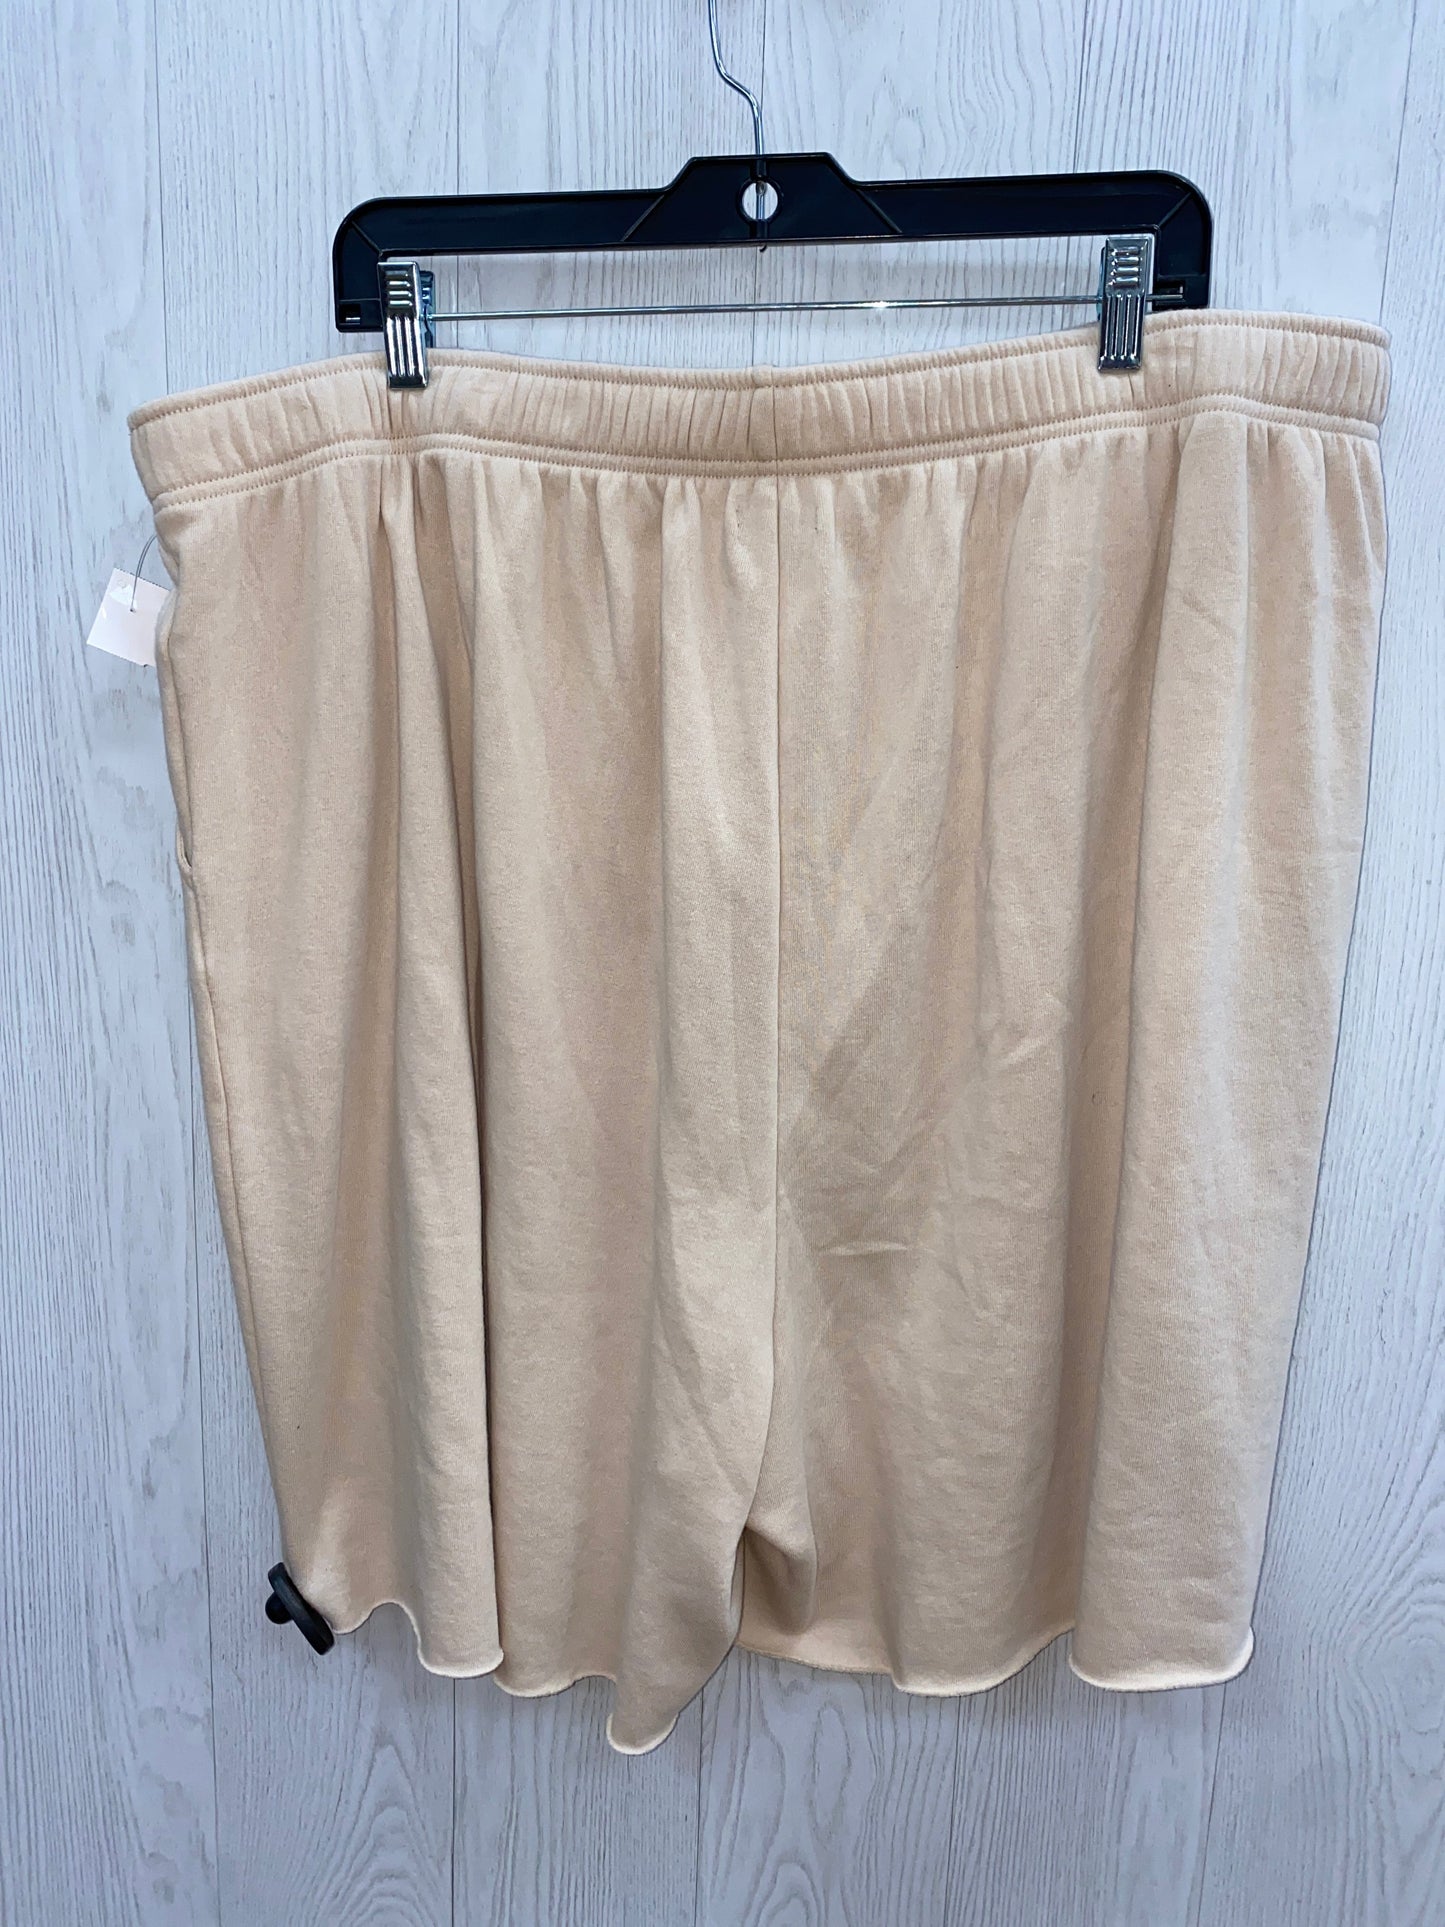 Athletic Shorts By Wild Fable  Size: 2x